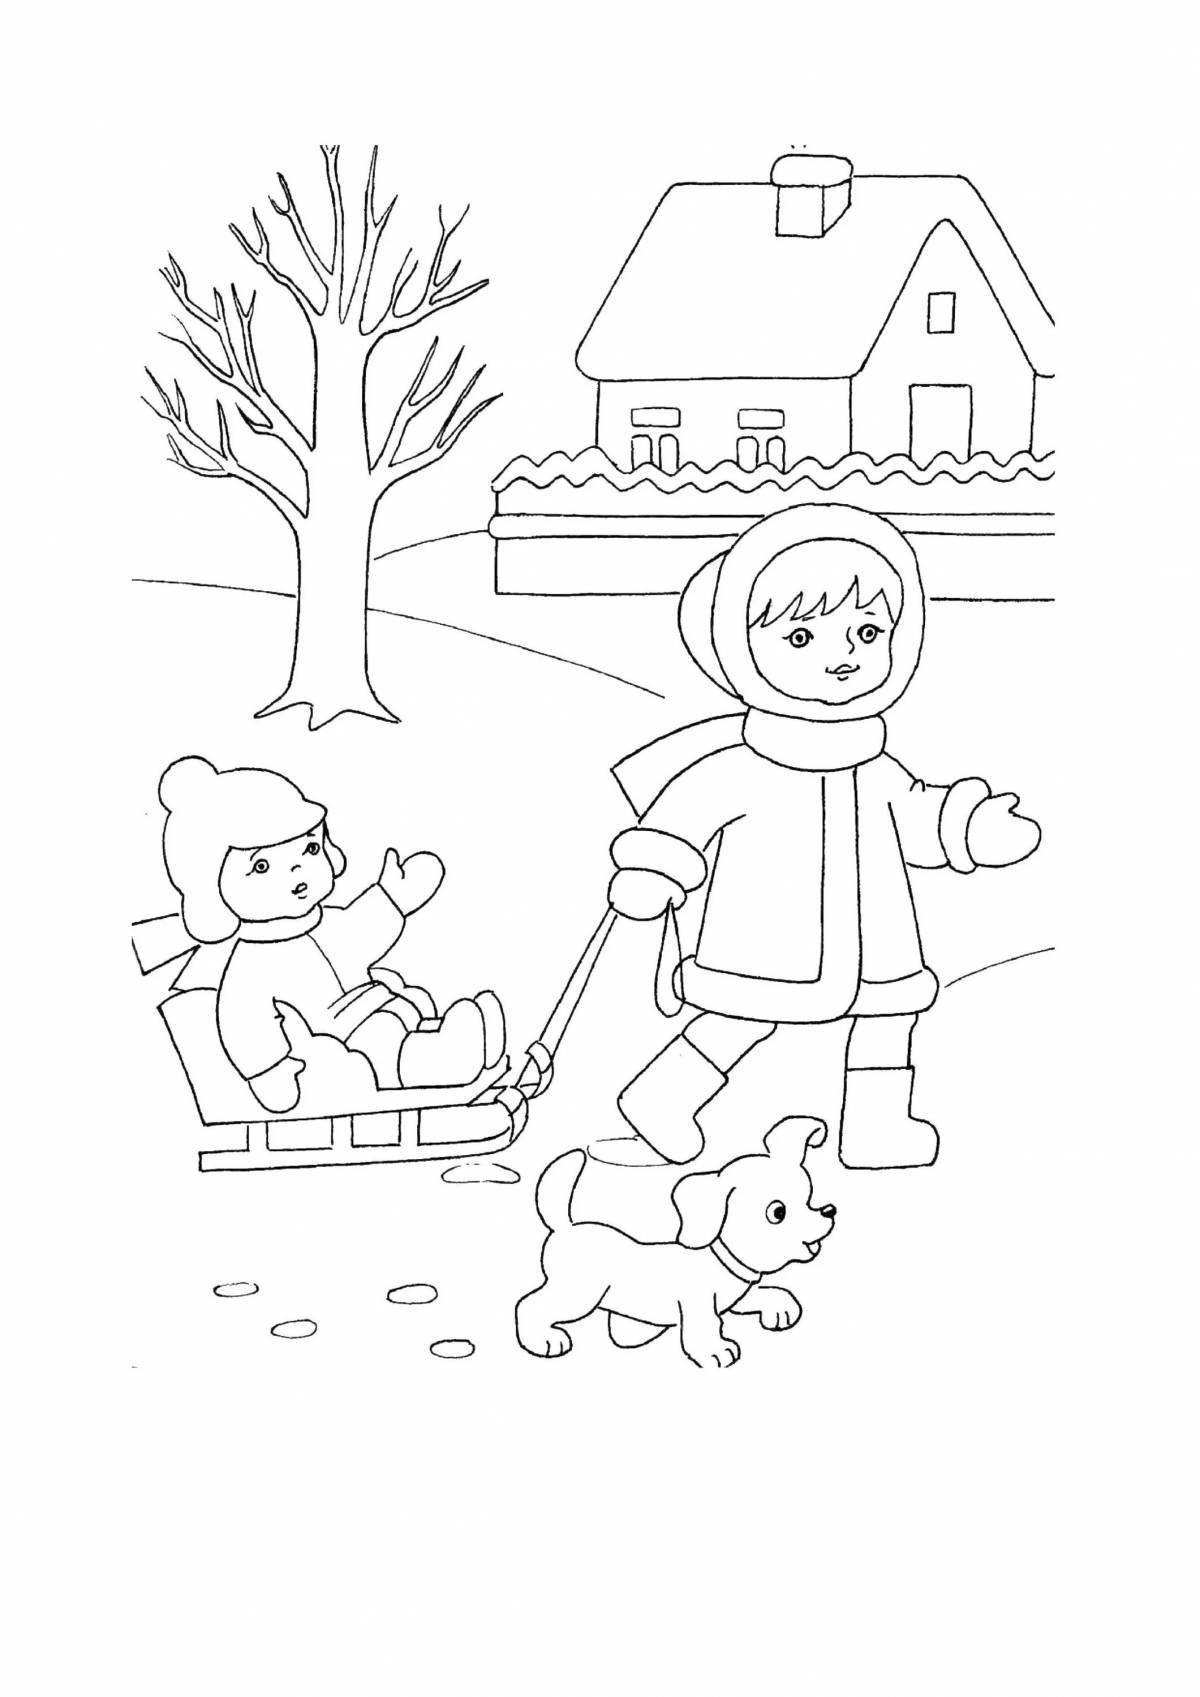 Quirky kys turaly coloring book